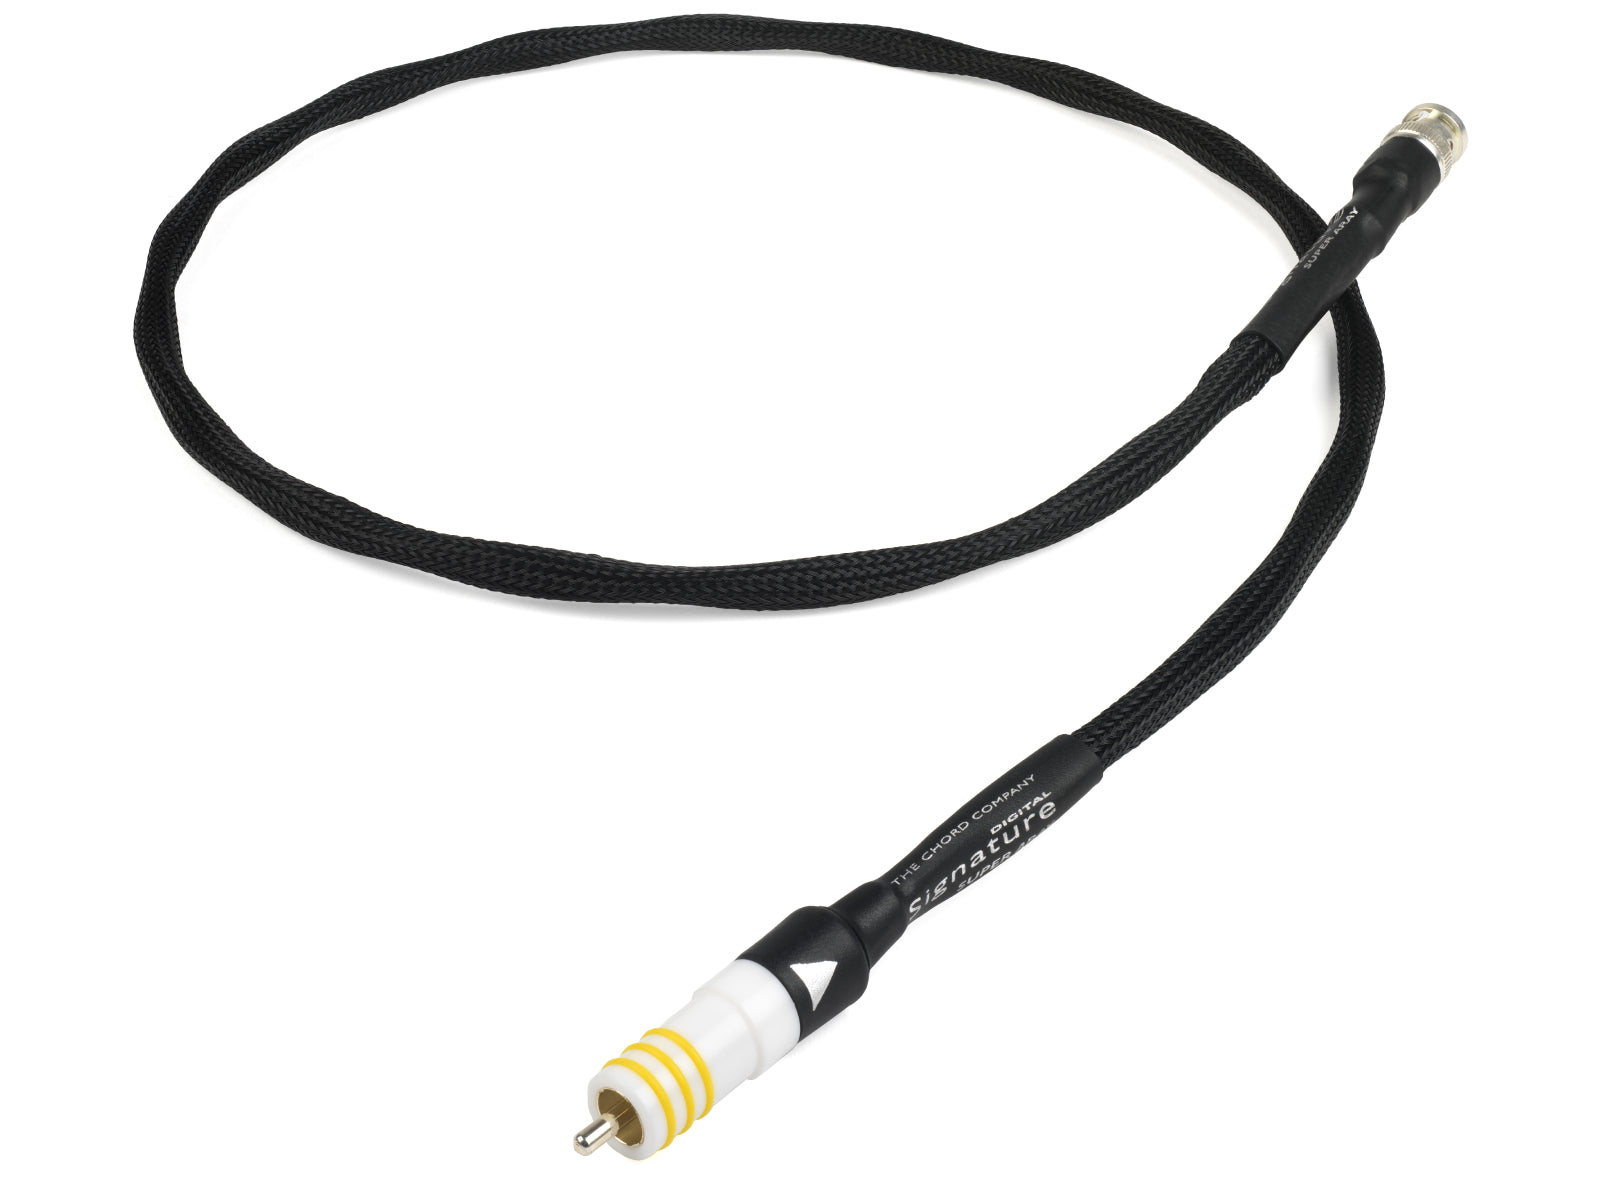 Chord Signature Super ARAY Digital RCA to BNC (ChorAlloy plated)